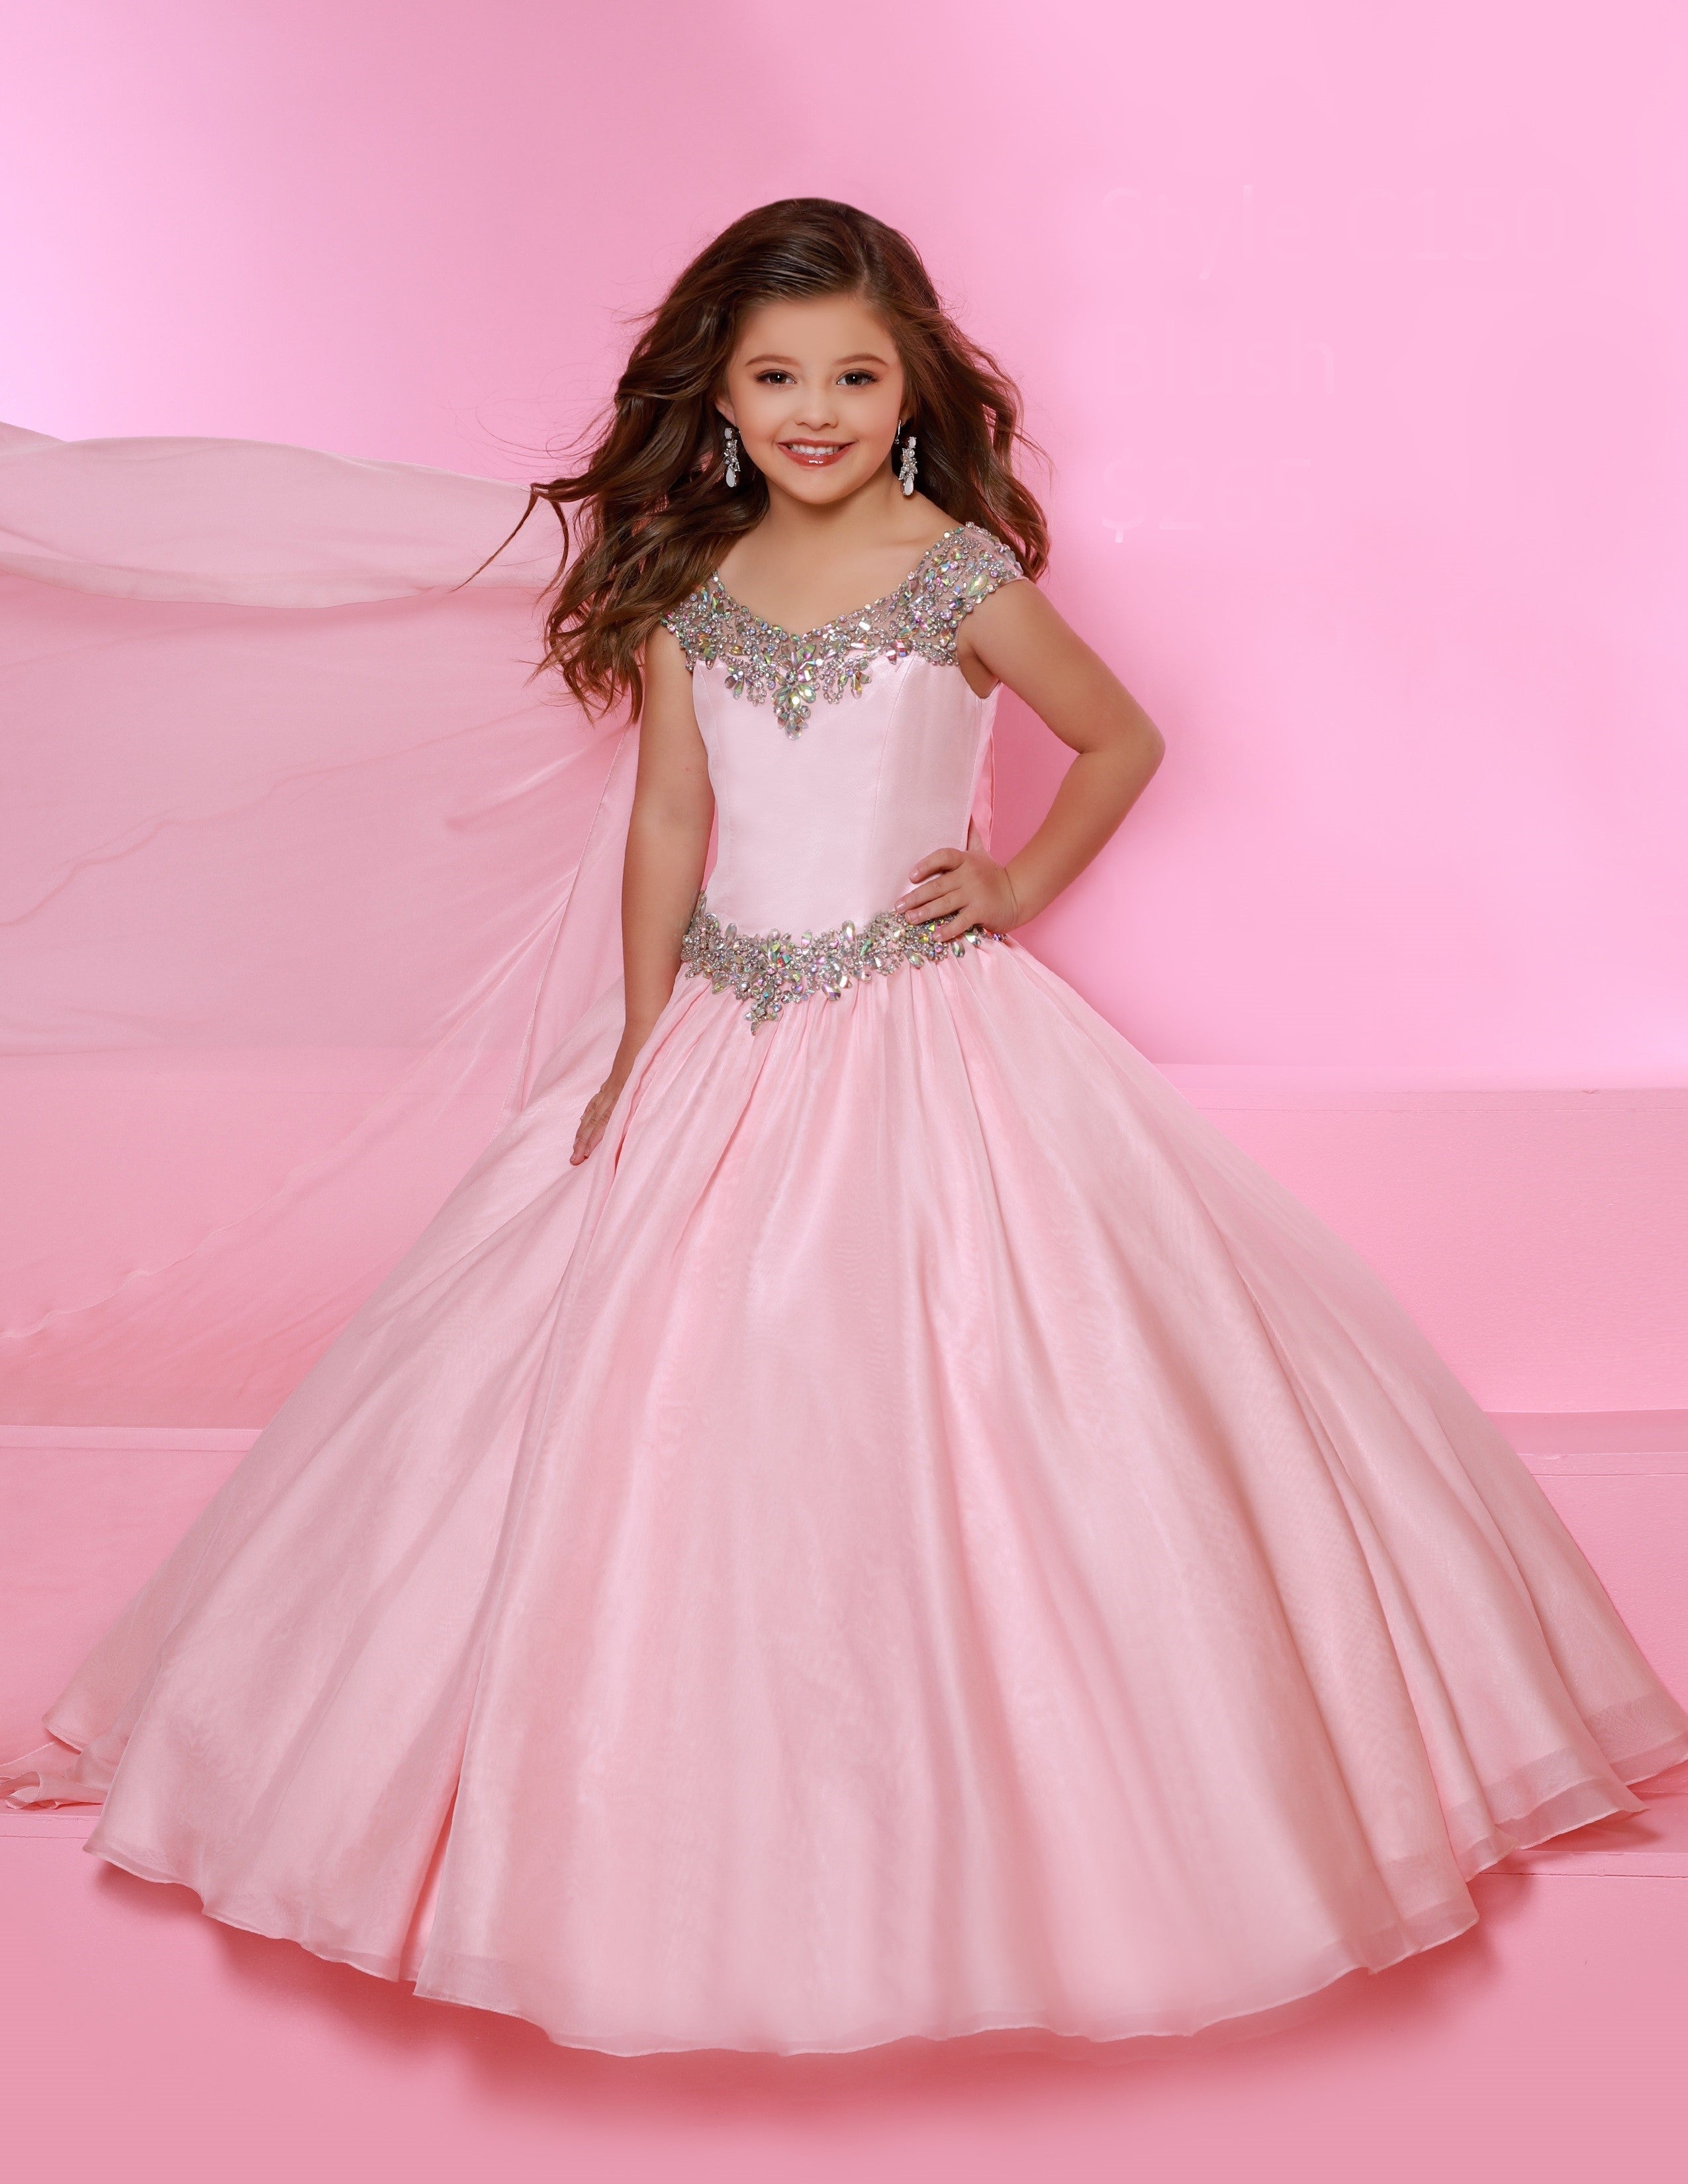 in Stock Sugar Kayne C169 Size 10, 12 Long Girls Pageant Ballgown Ombre One Shoulder Dress 12 / Blueberry/Ombre